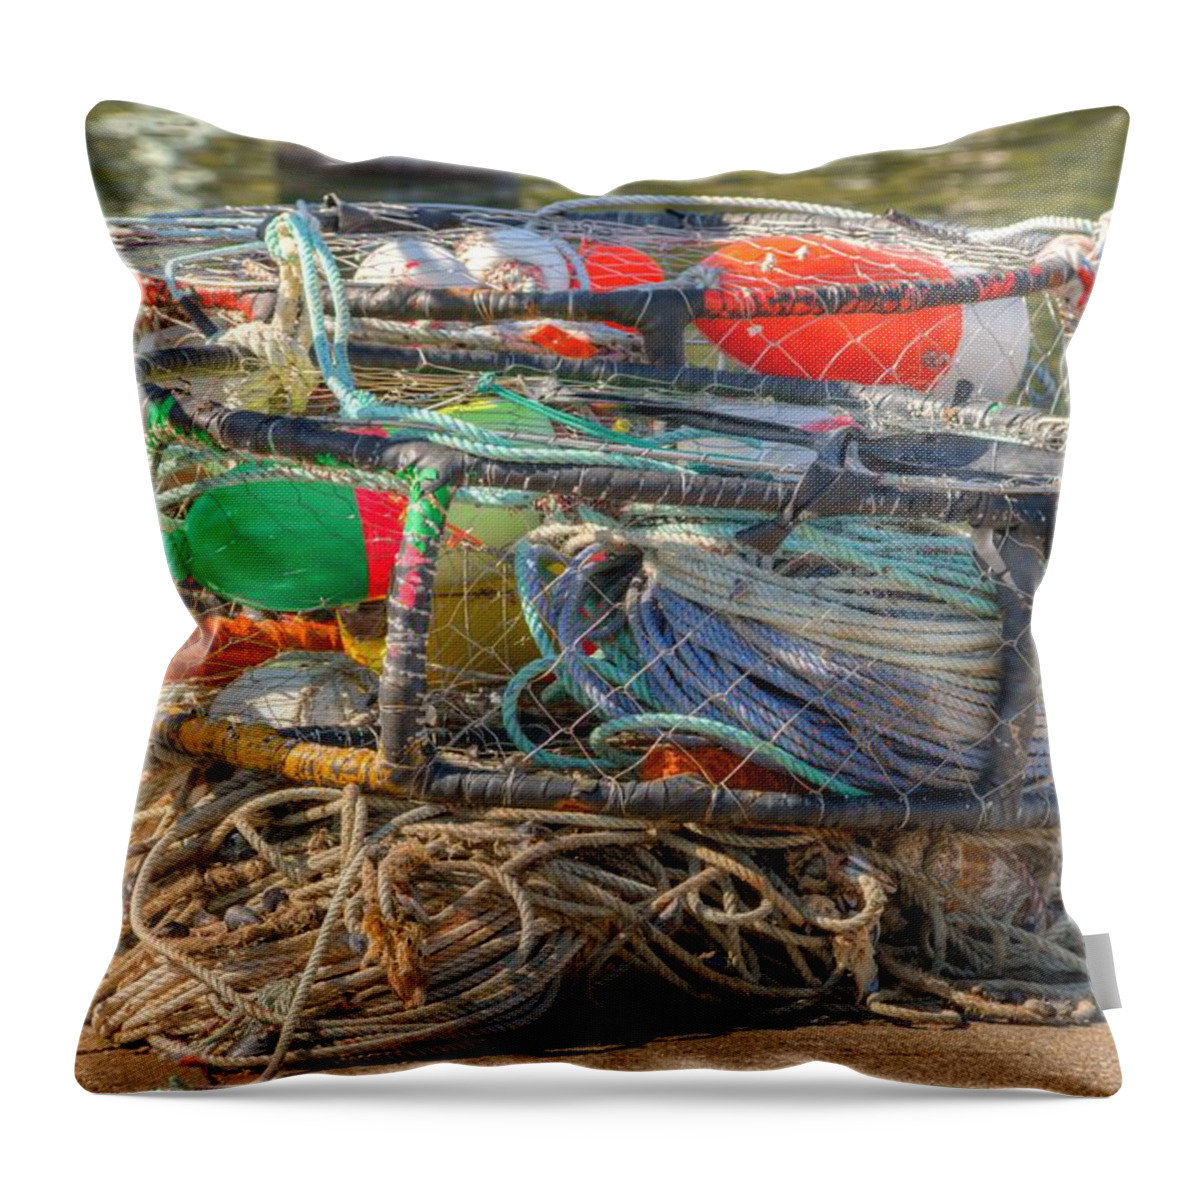 Floats Throw Pillow featuring the photograph Organized Chaos 0010 by Kristina Rinell